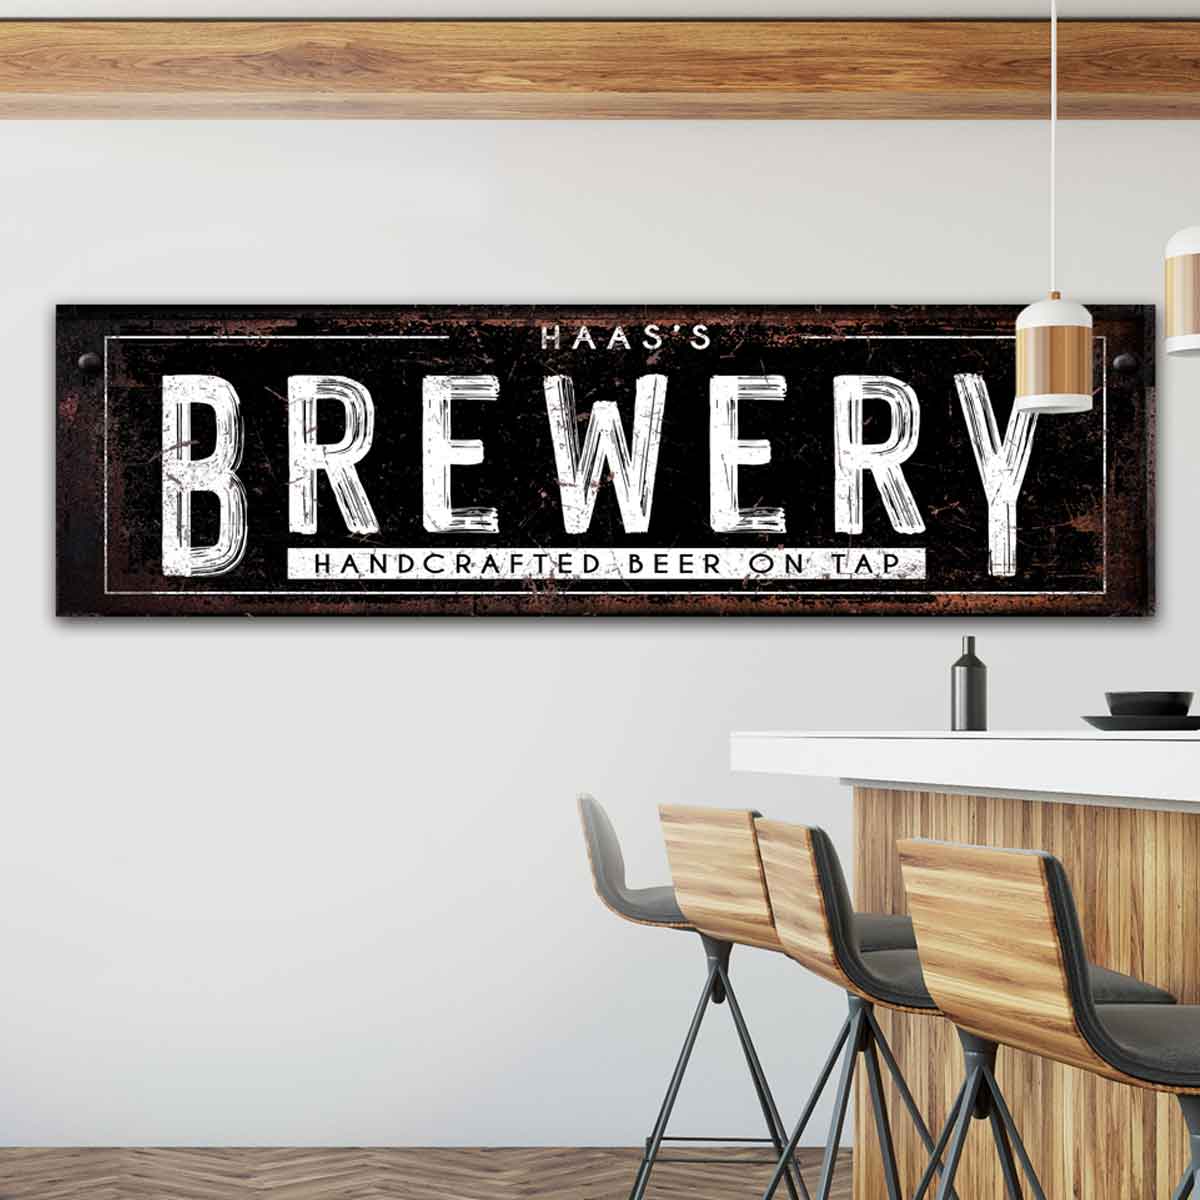 Personalized Bar sign in distressed black rusted background with big words "BREWERY" handcrafted beer on tap. Personalized with your name in white print.